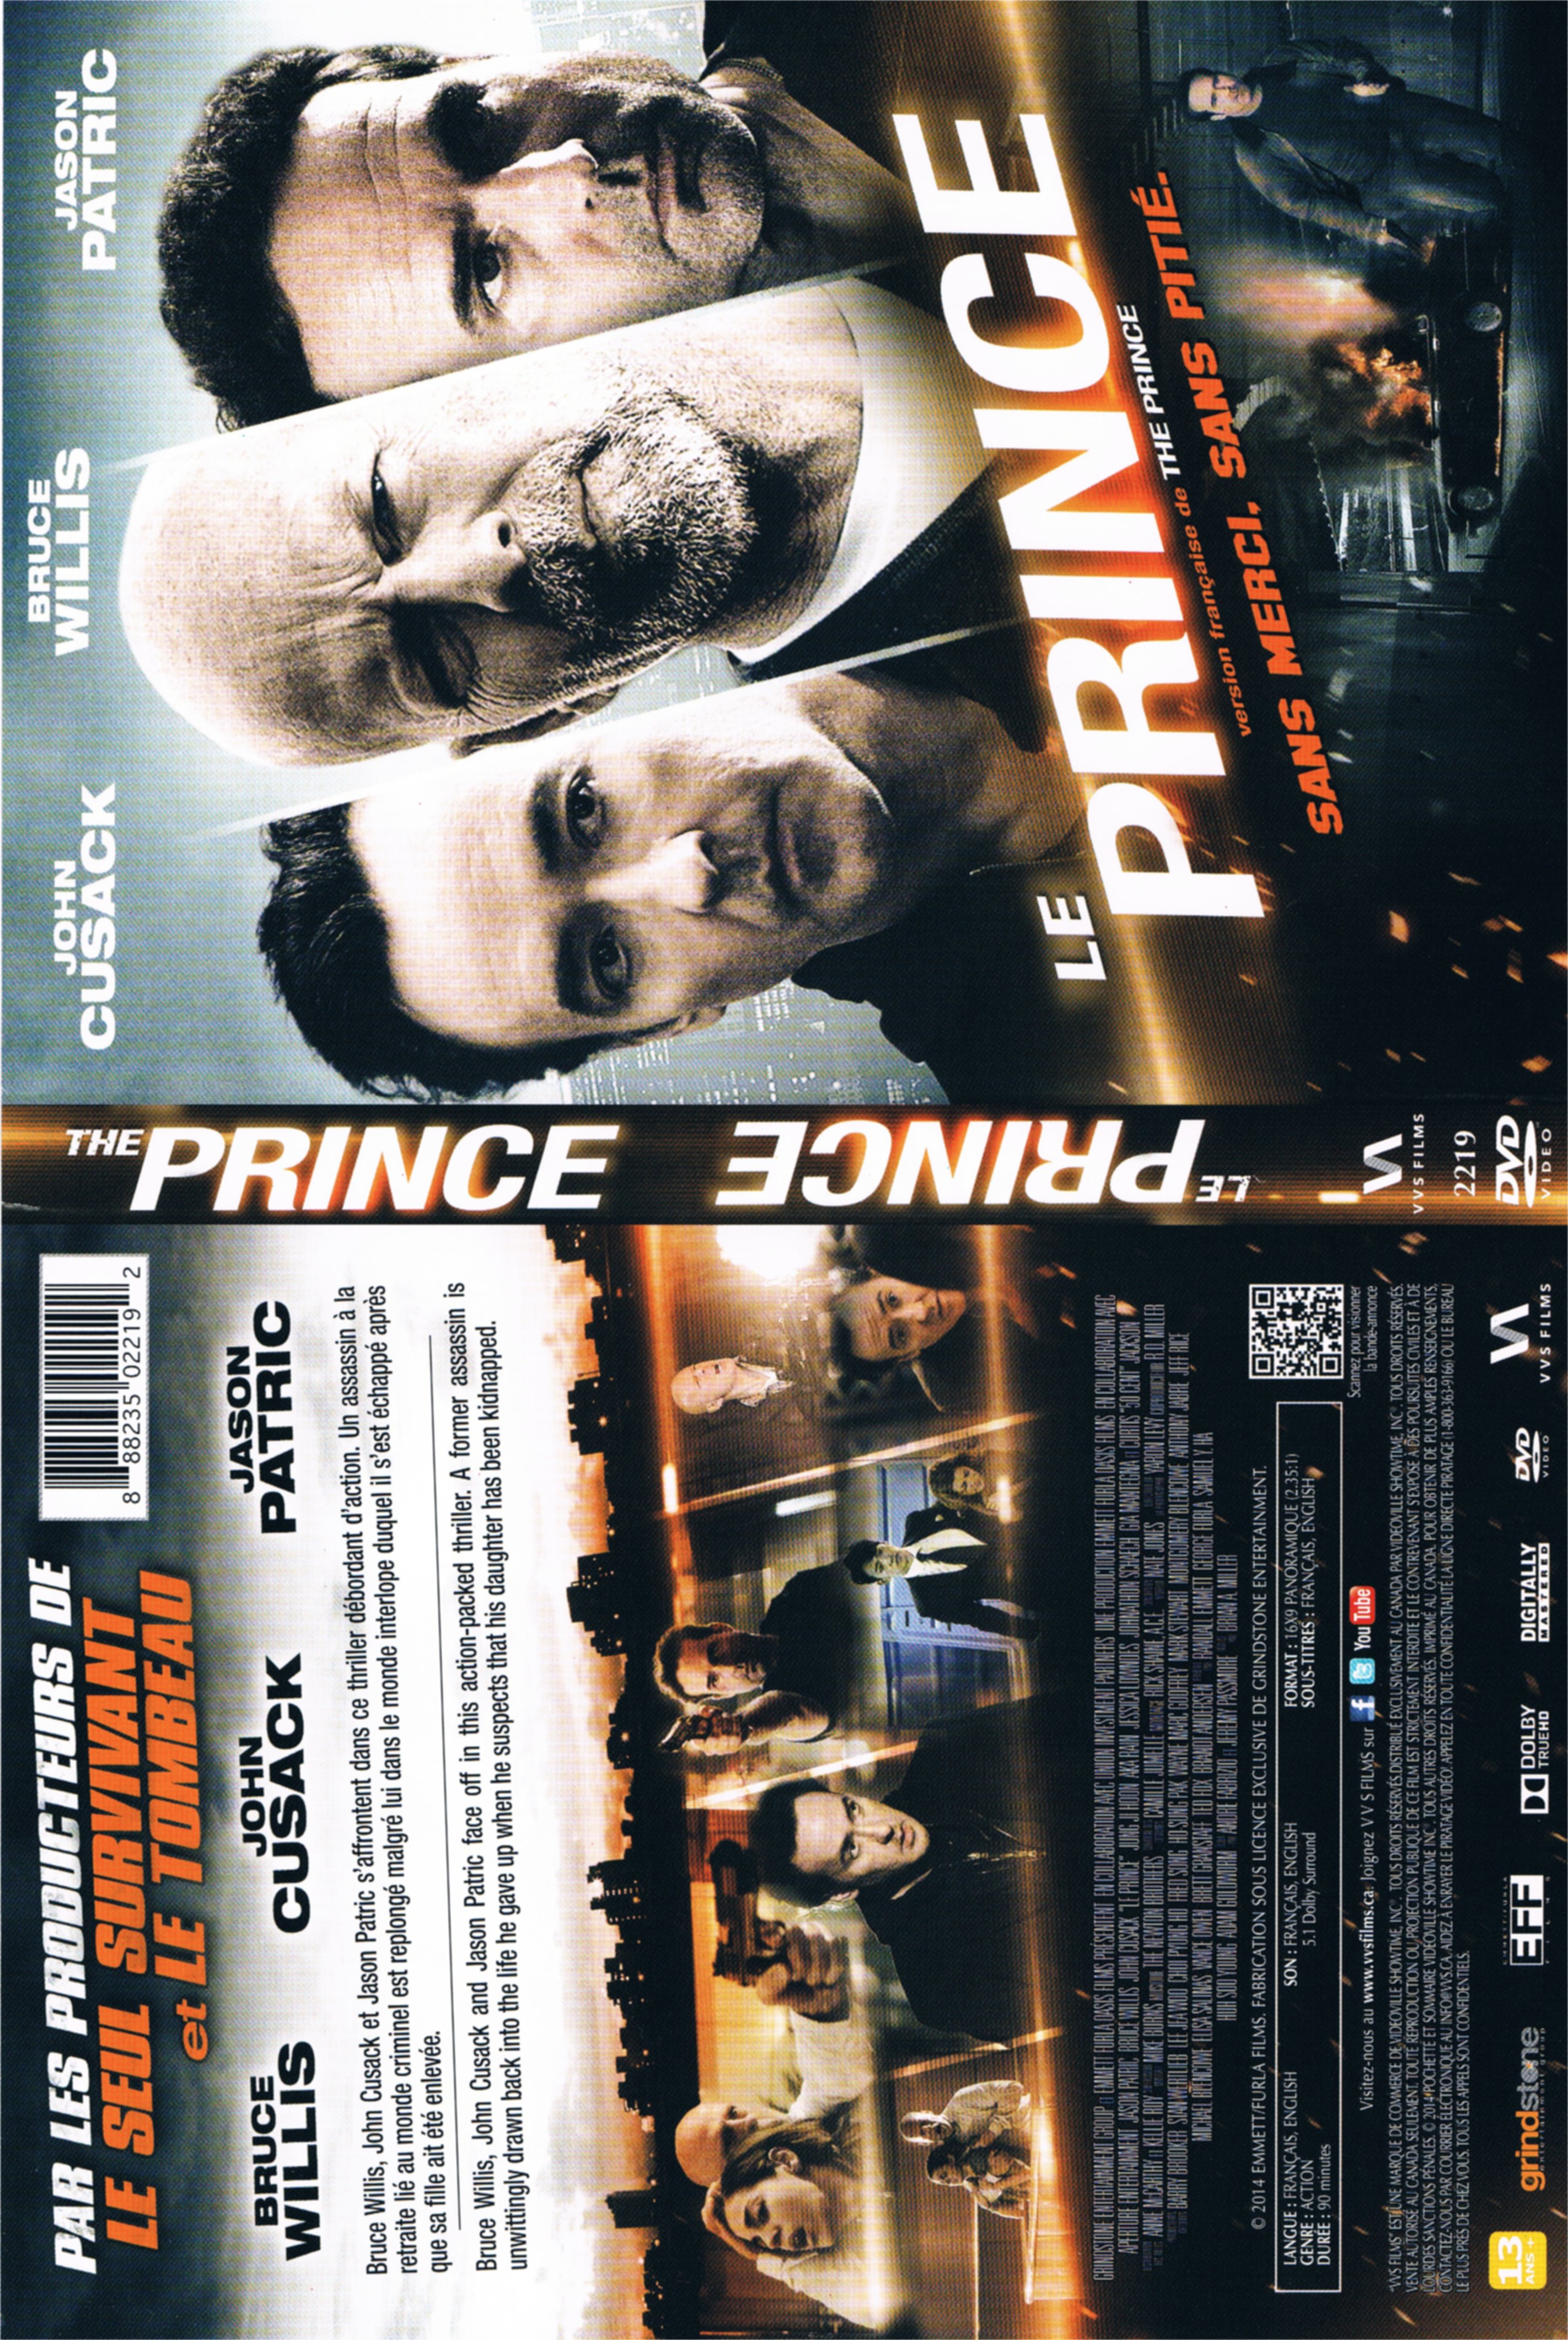 Jaquette DVD Le prince - The prince (Canadienne)